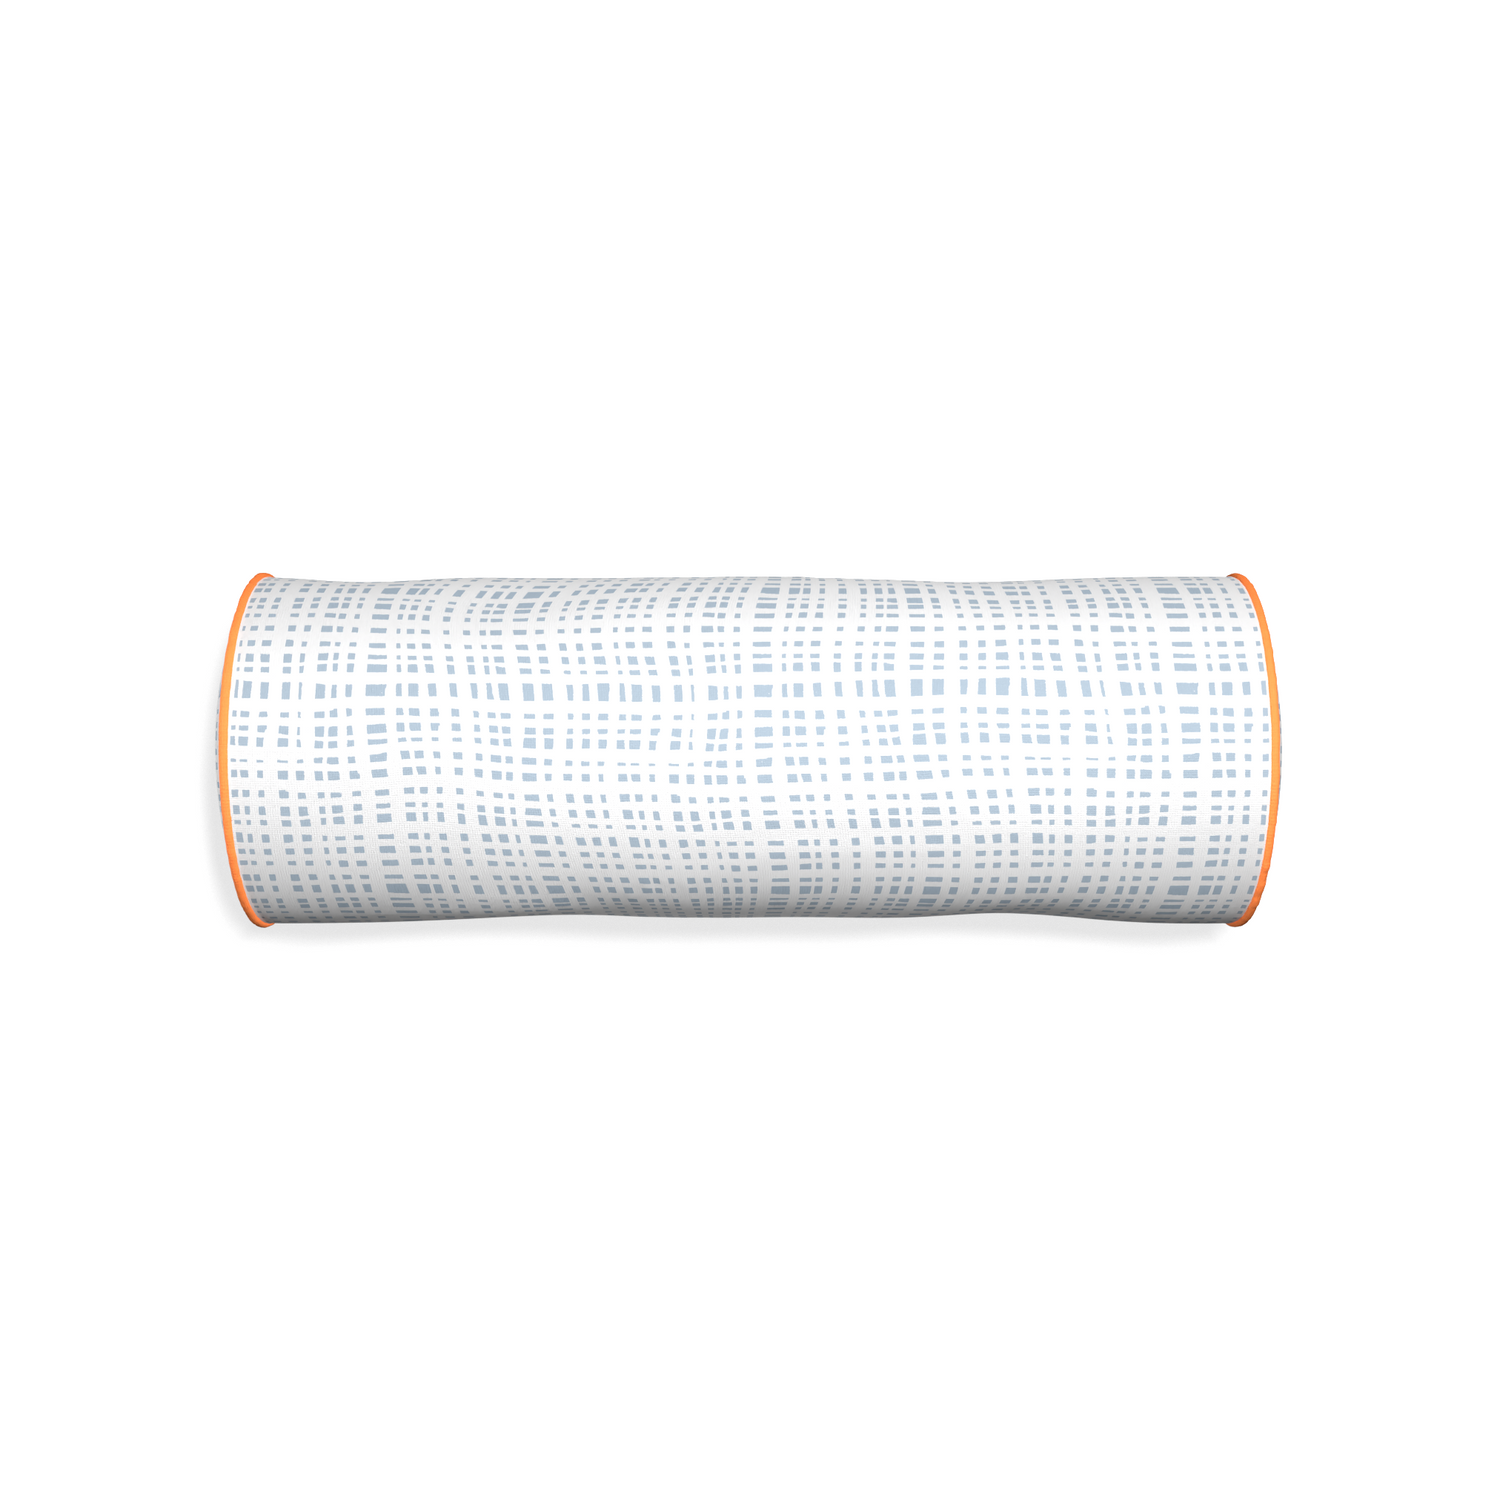 Bolster ginger sky custom plaid sky bluepillow with clementine piping on white background